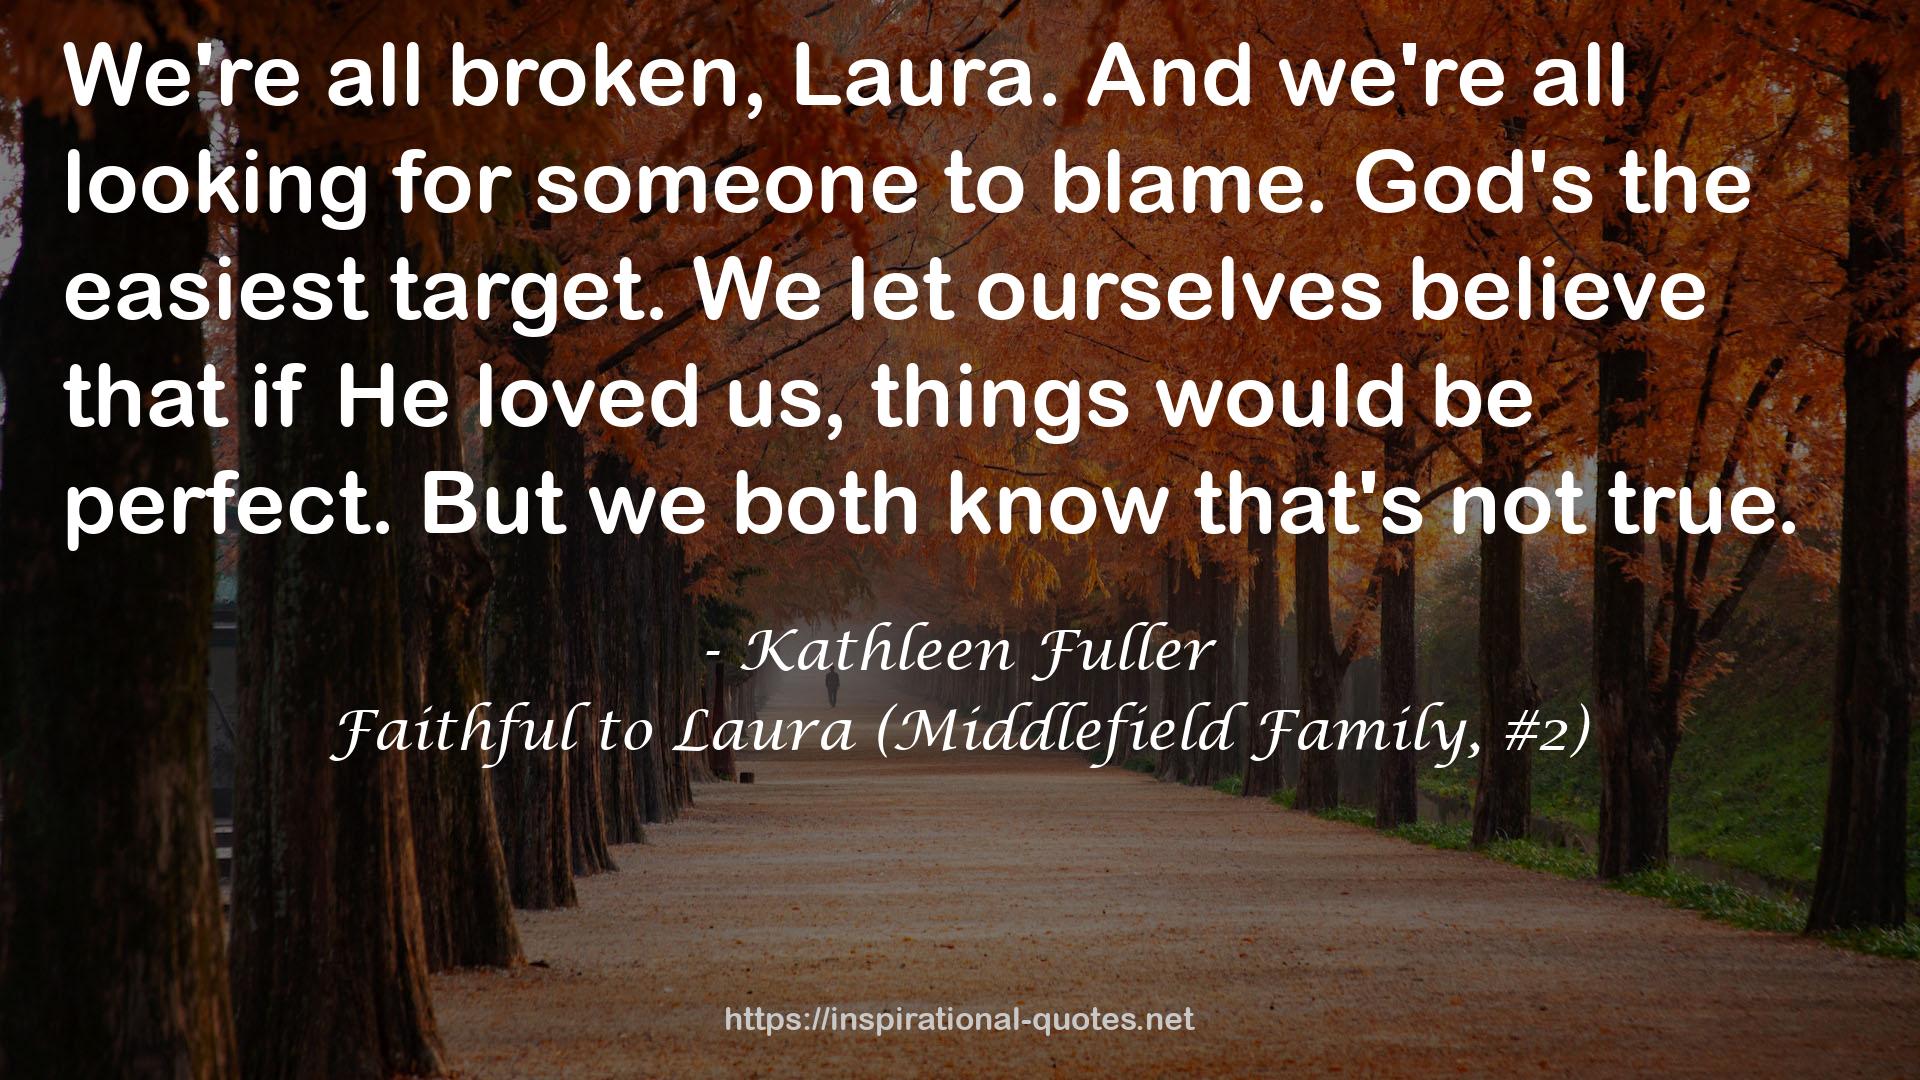 Faithful to Laura (Middlefield Family, #2) QUOTES